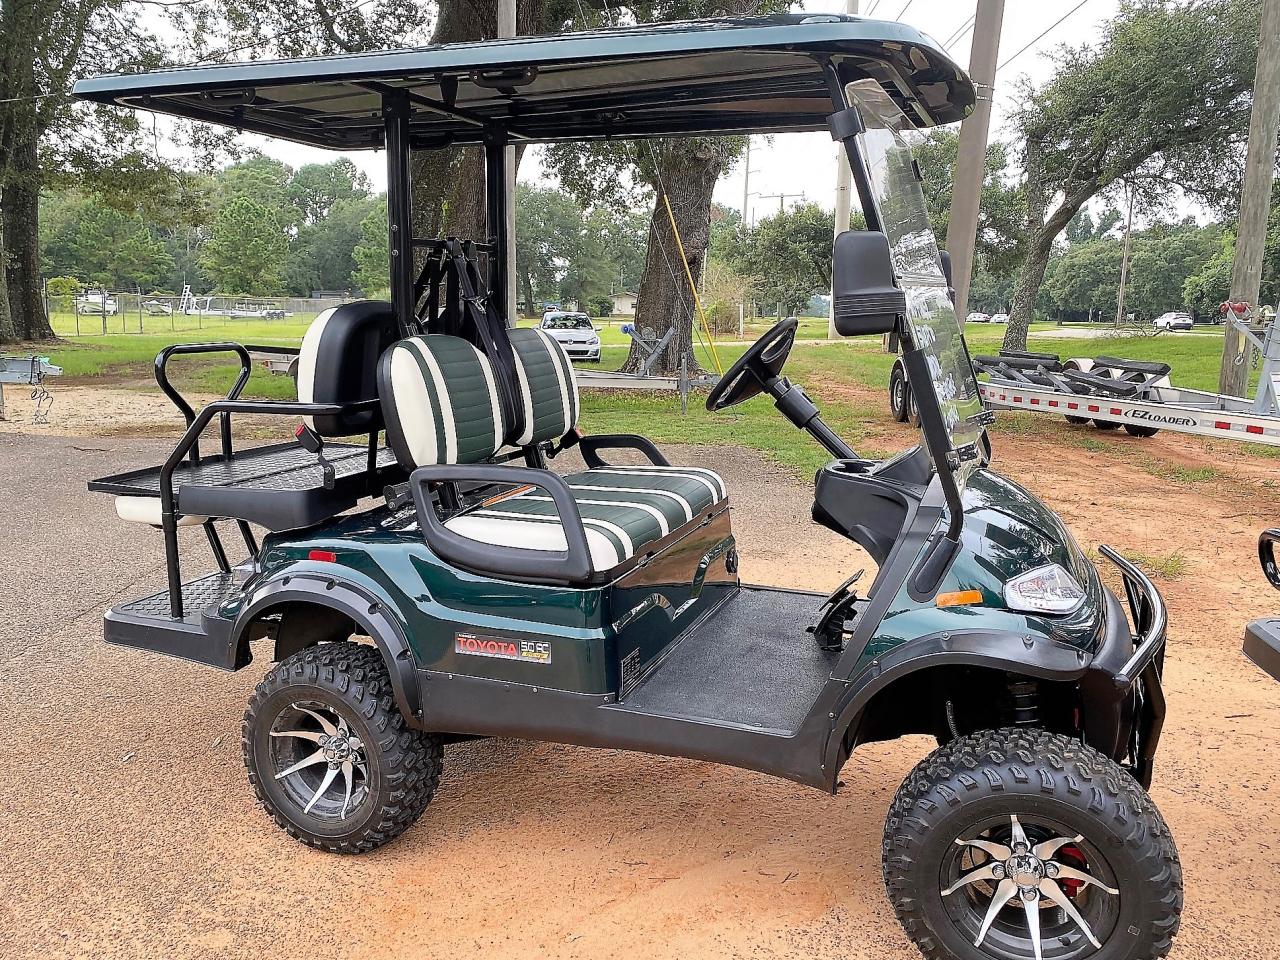 Used Golf Carts for Sale by Owner in Scurry, Texas: Find Your Perfect Ride